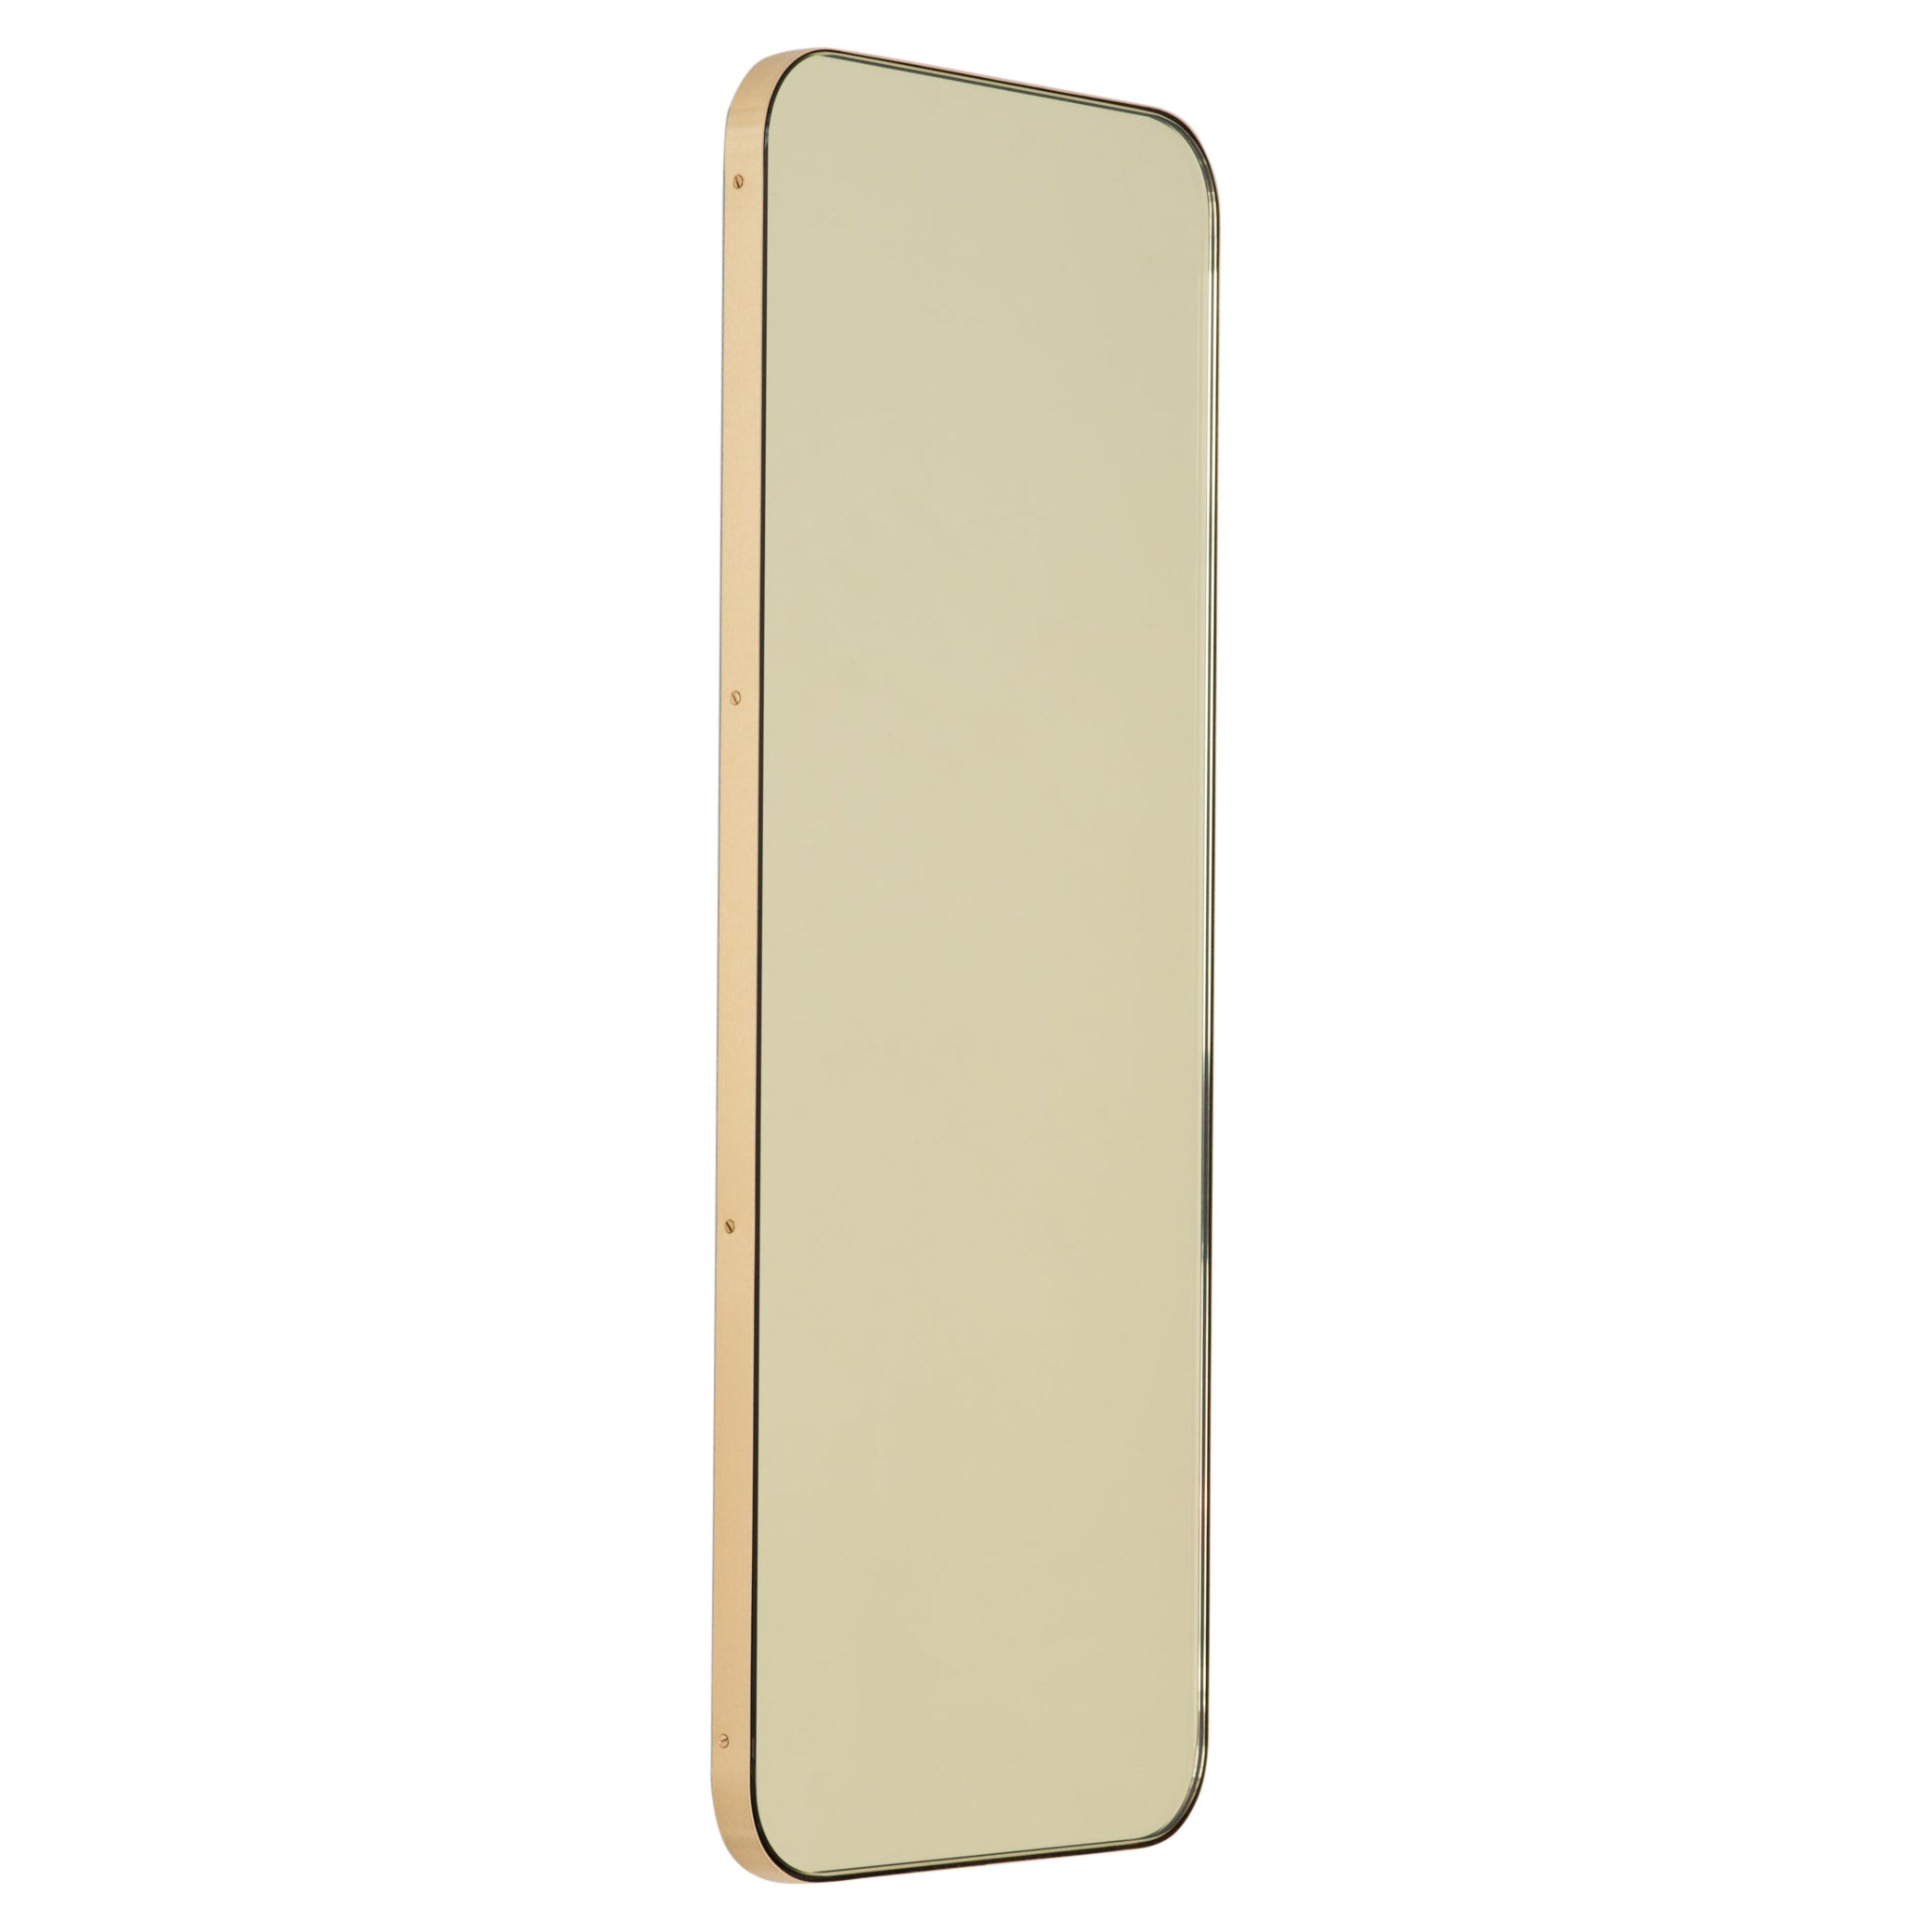 In Stock Quadris Gold Tinted Rectangular Mirror, Brass Frame, Small For Sale